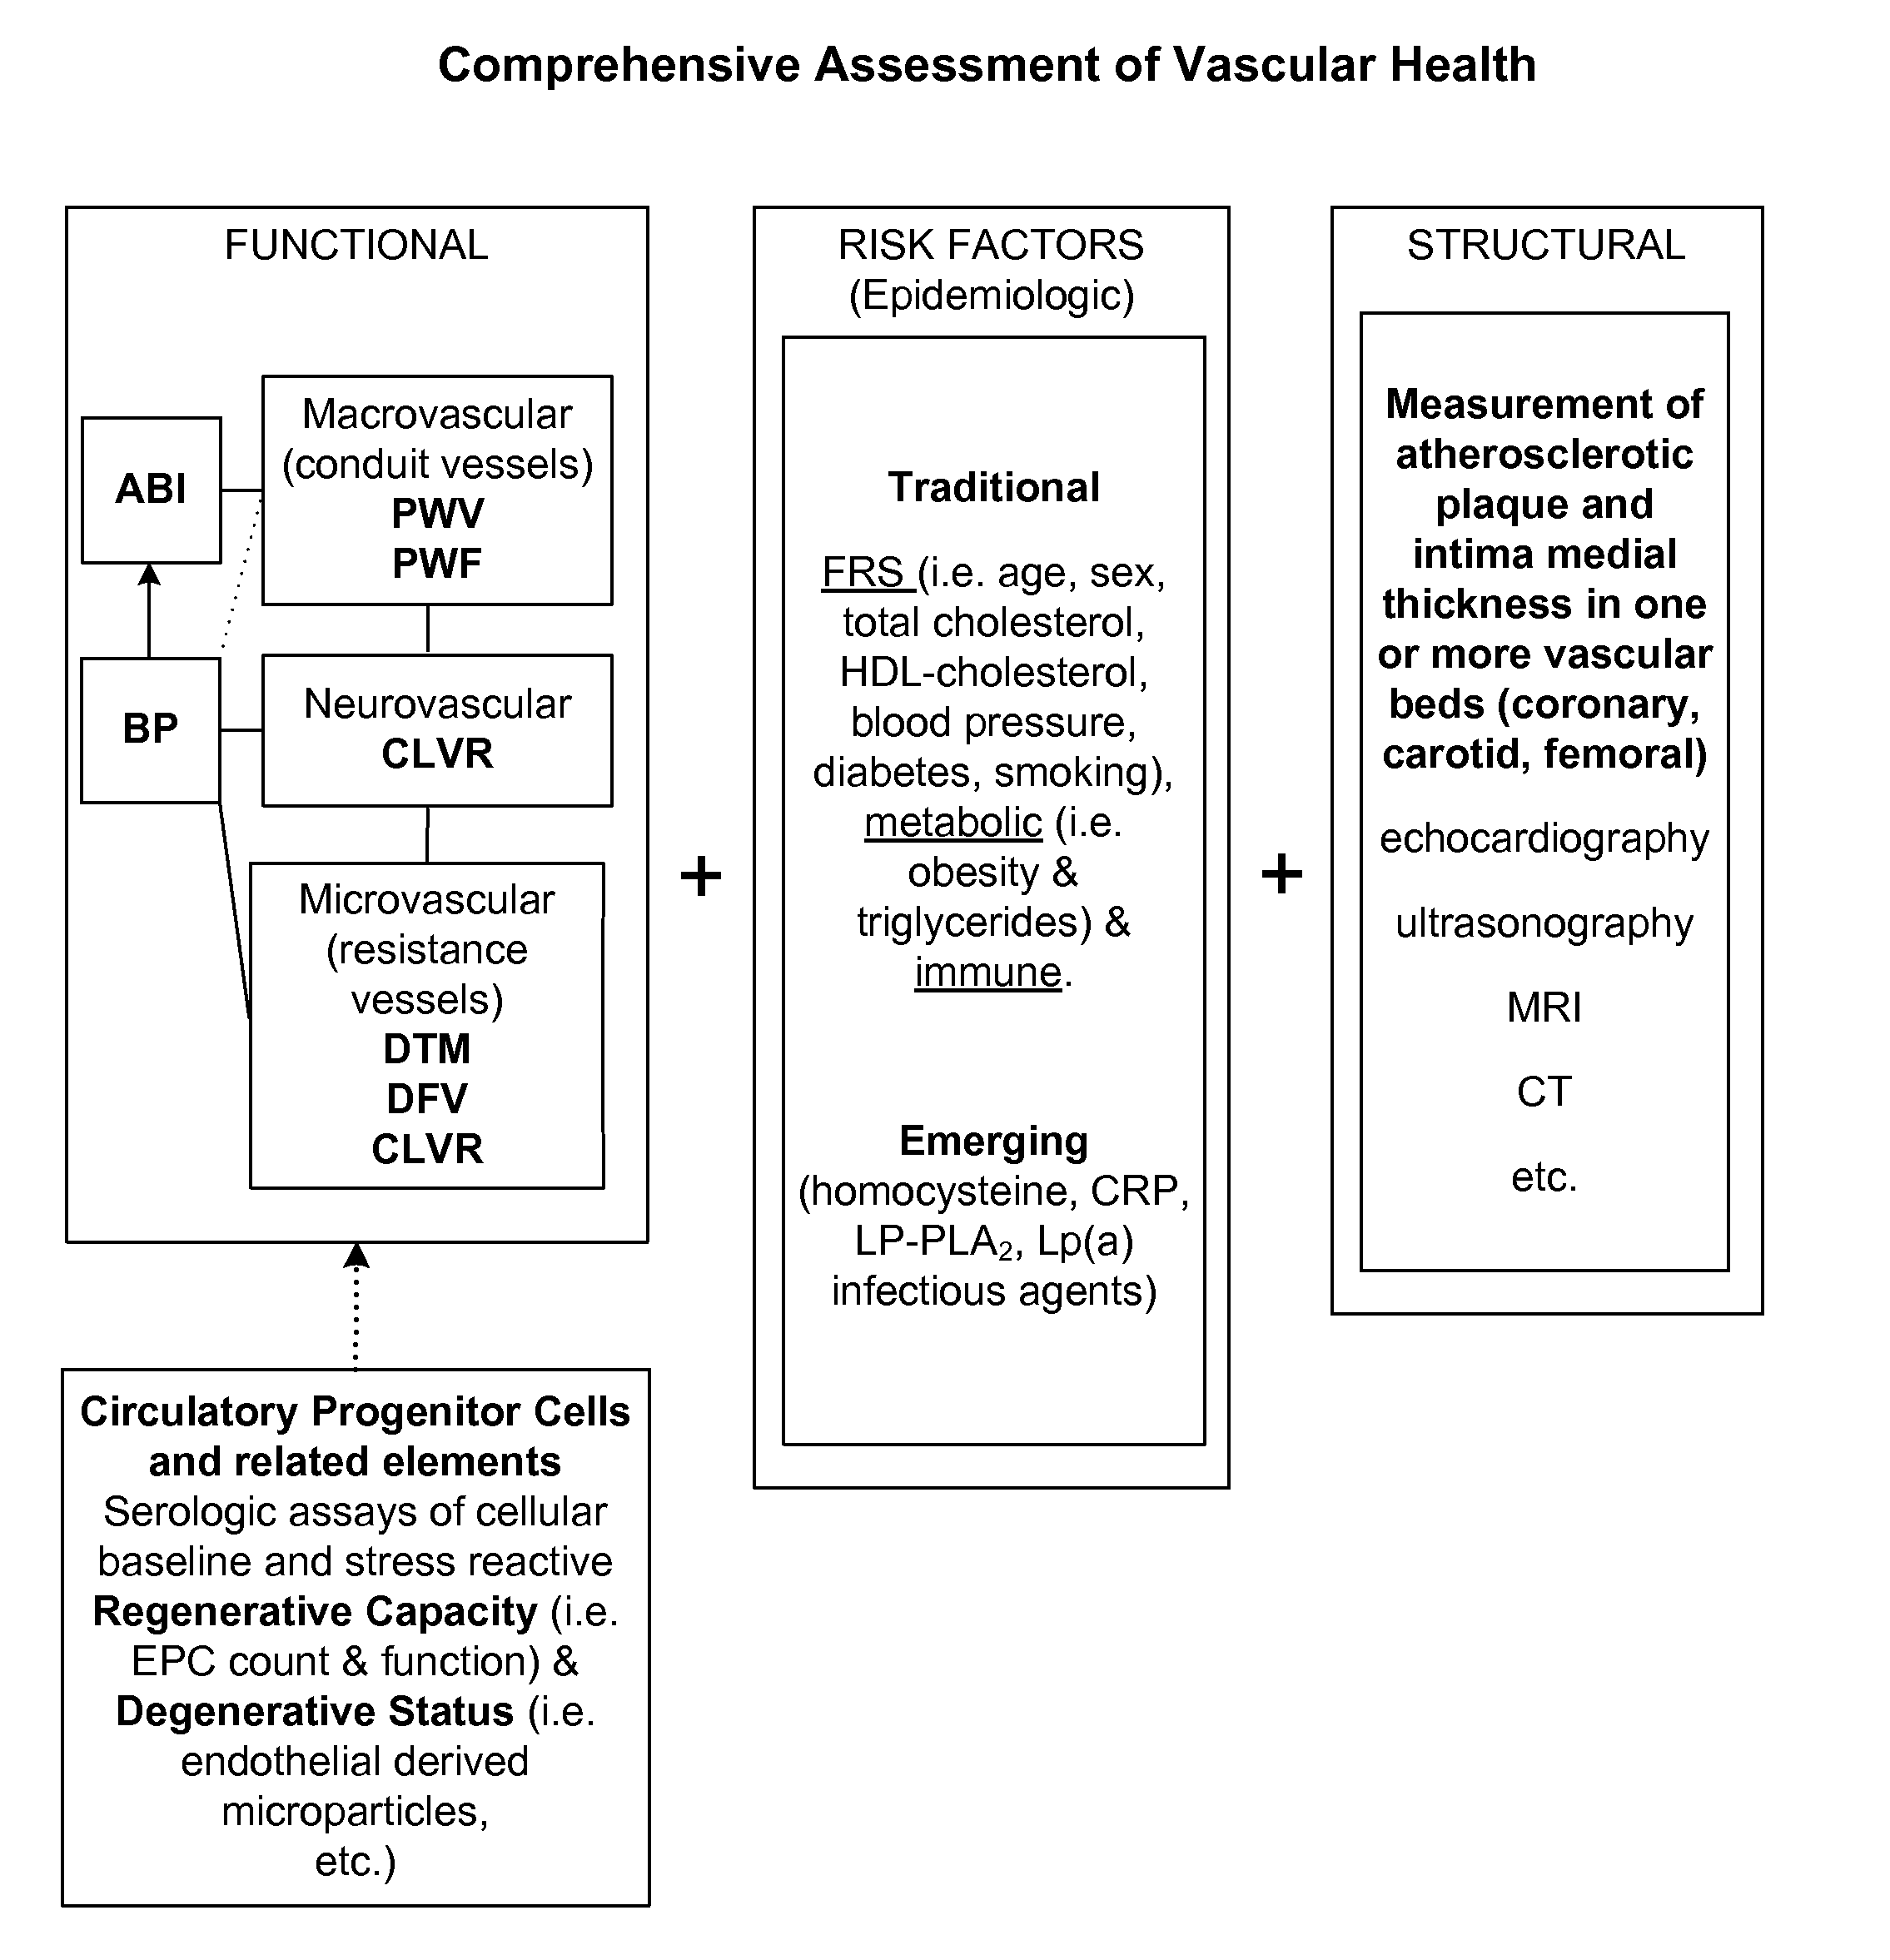 Method and apparatus for comprehensive assessment of vascular health